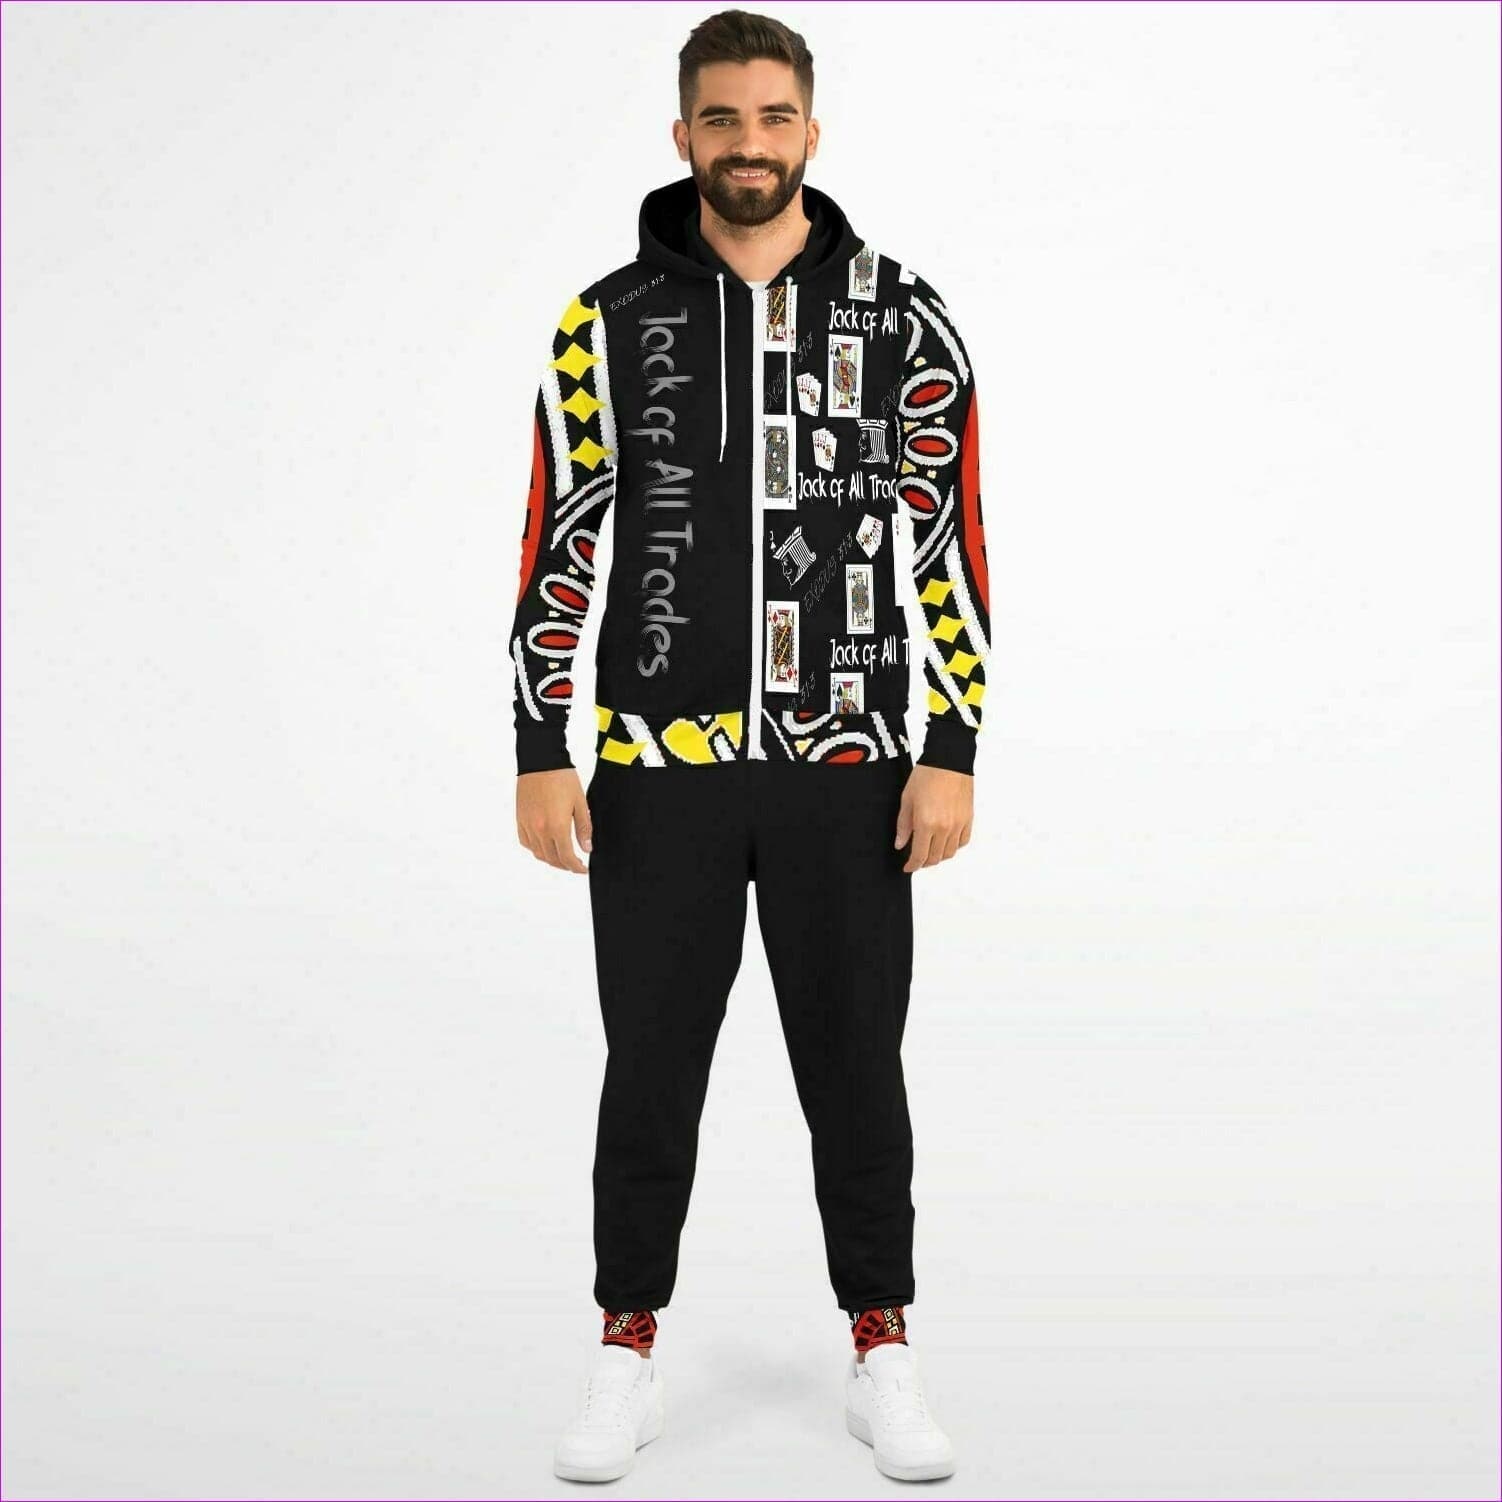 Jack Of All Trades Men's Jogging Suit - Fashion Ziphoodie & Jogger - AOP at TFC&H Co.